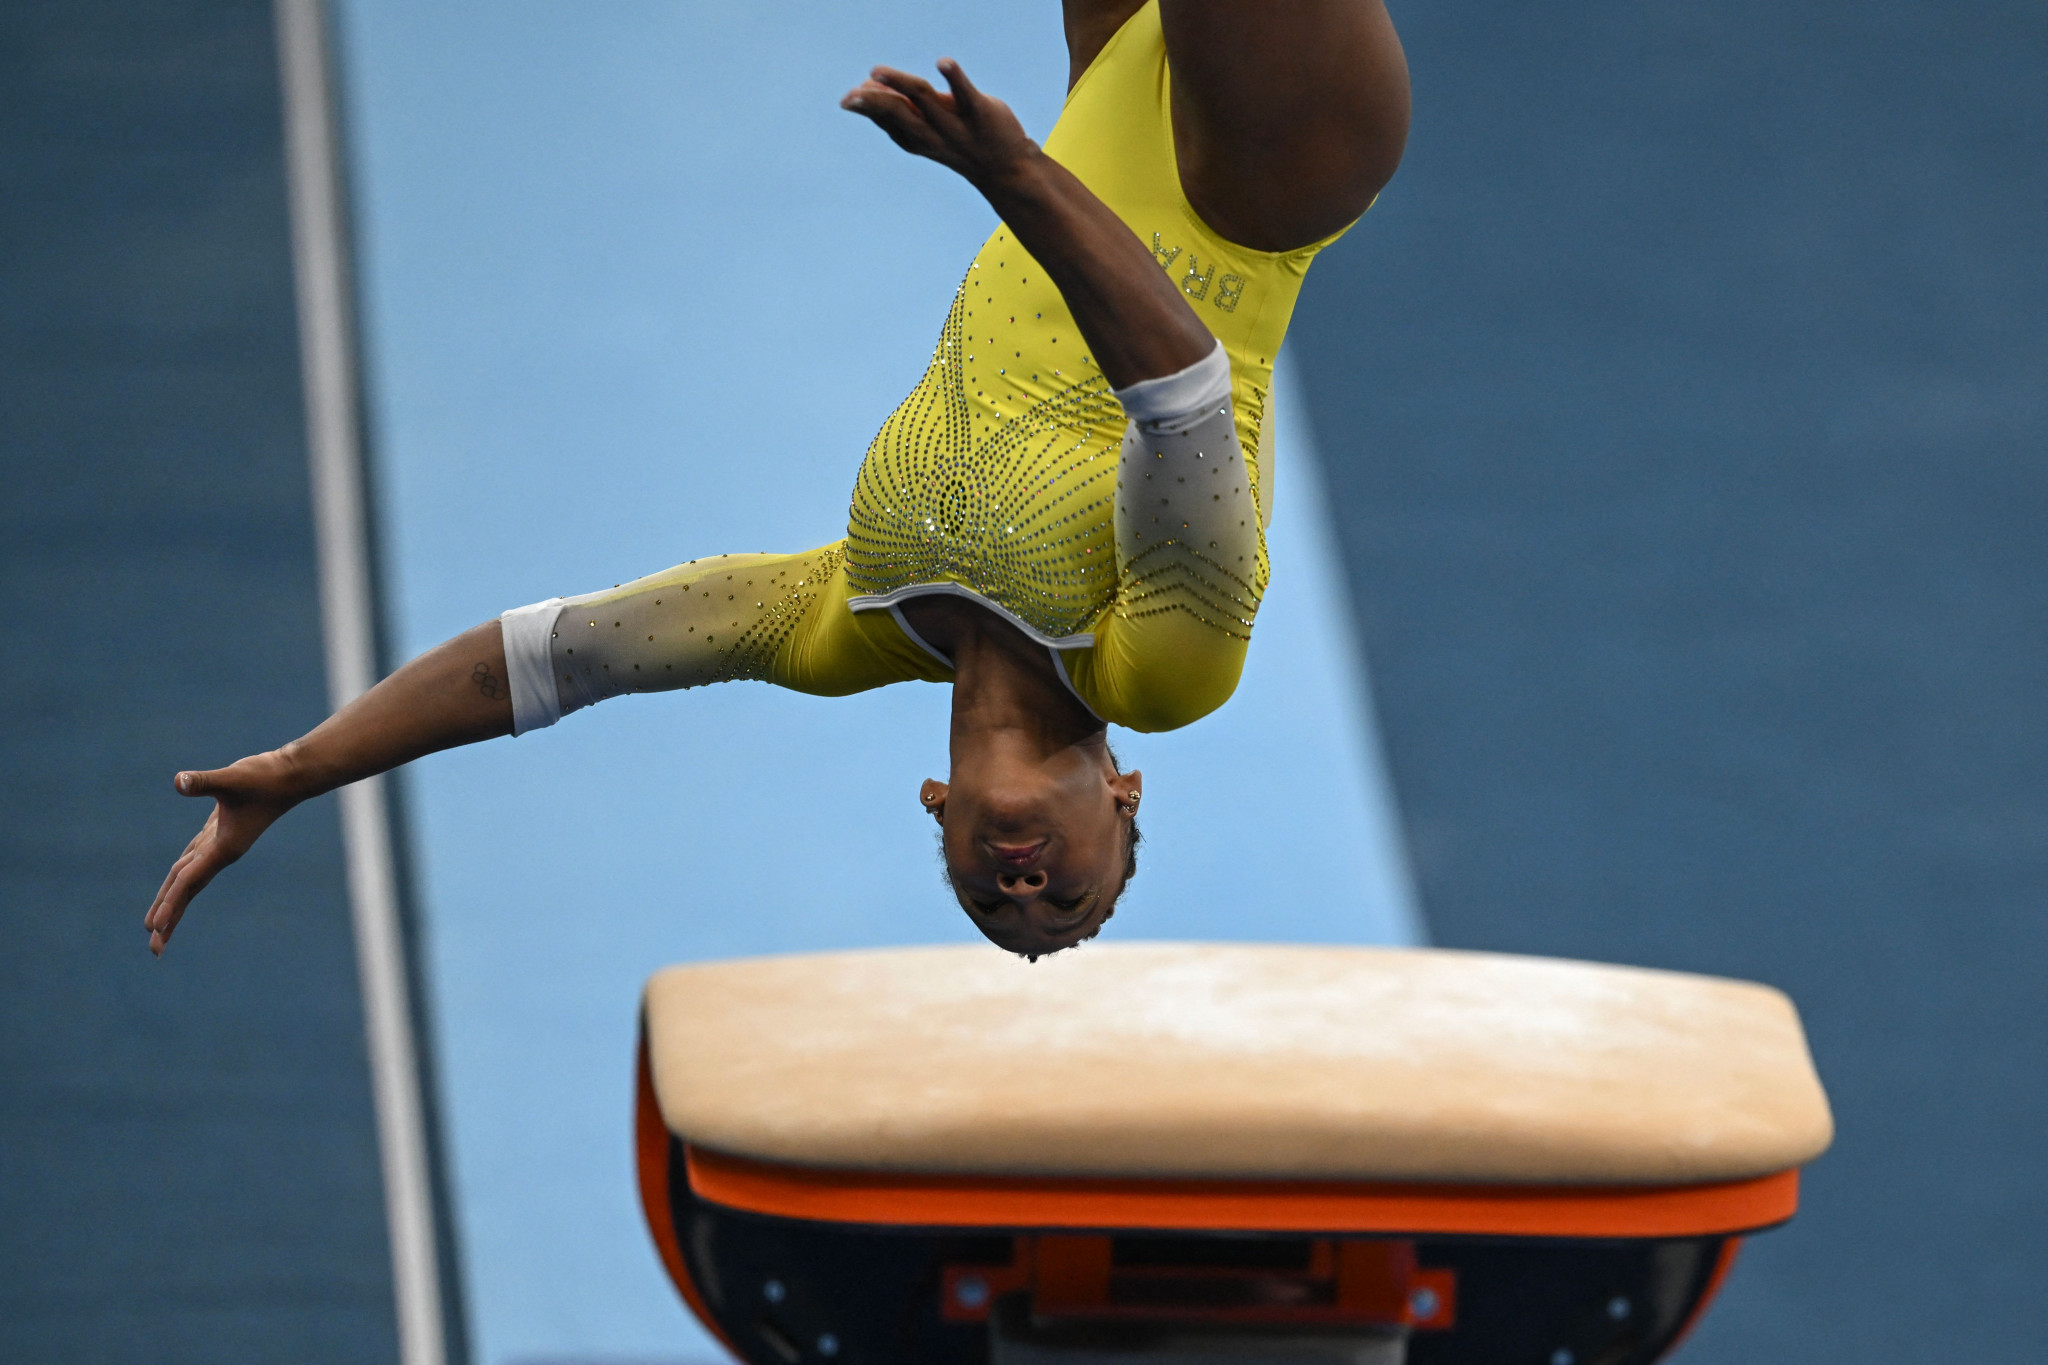 Brazil's Olympic champion Rebeca Andrade won the women's vault title ©Getty Images